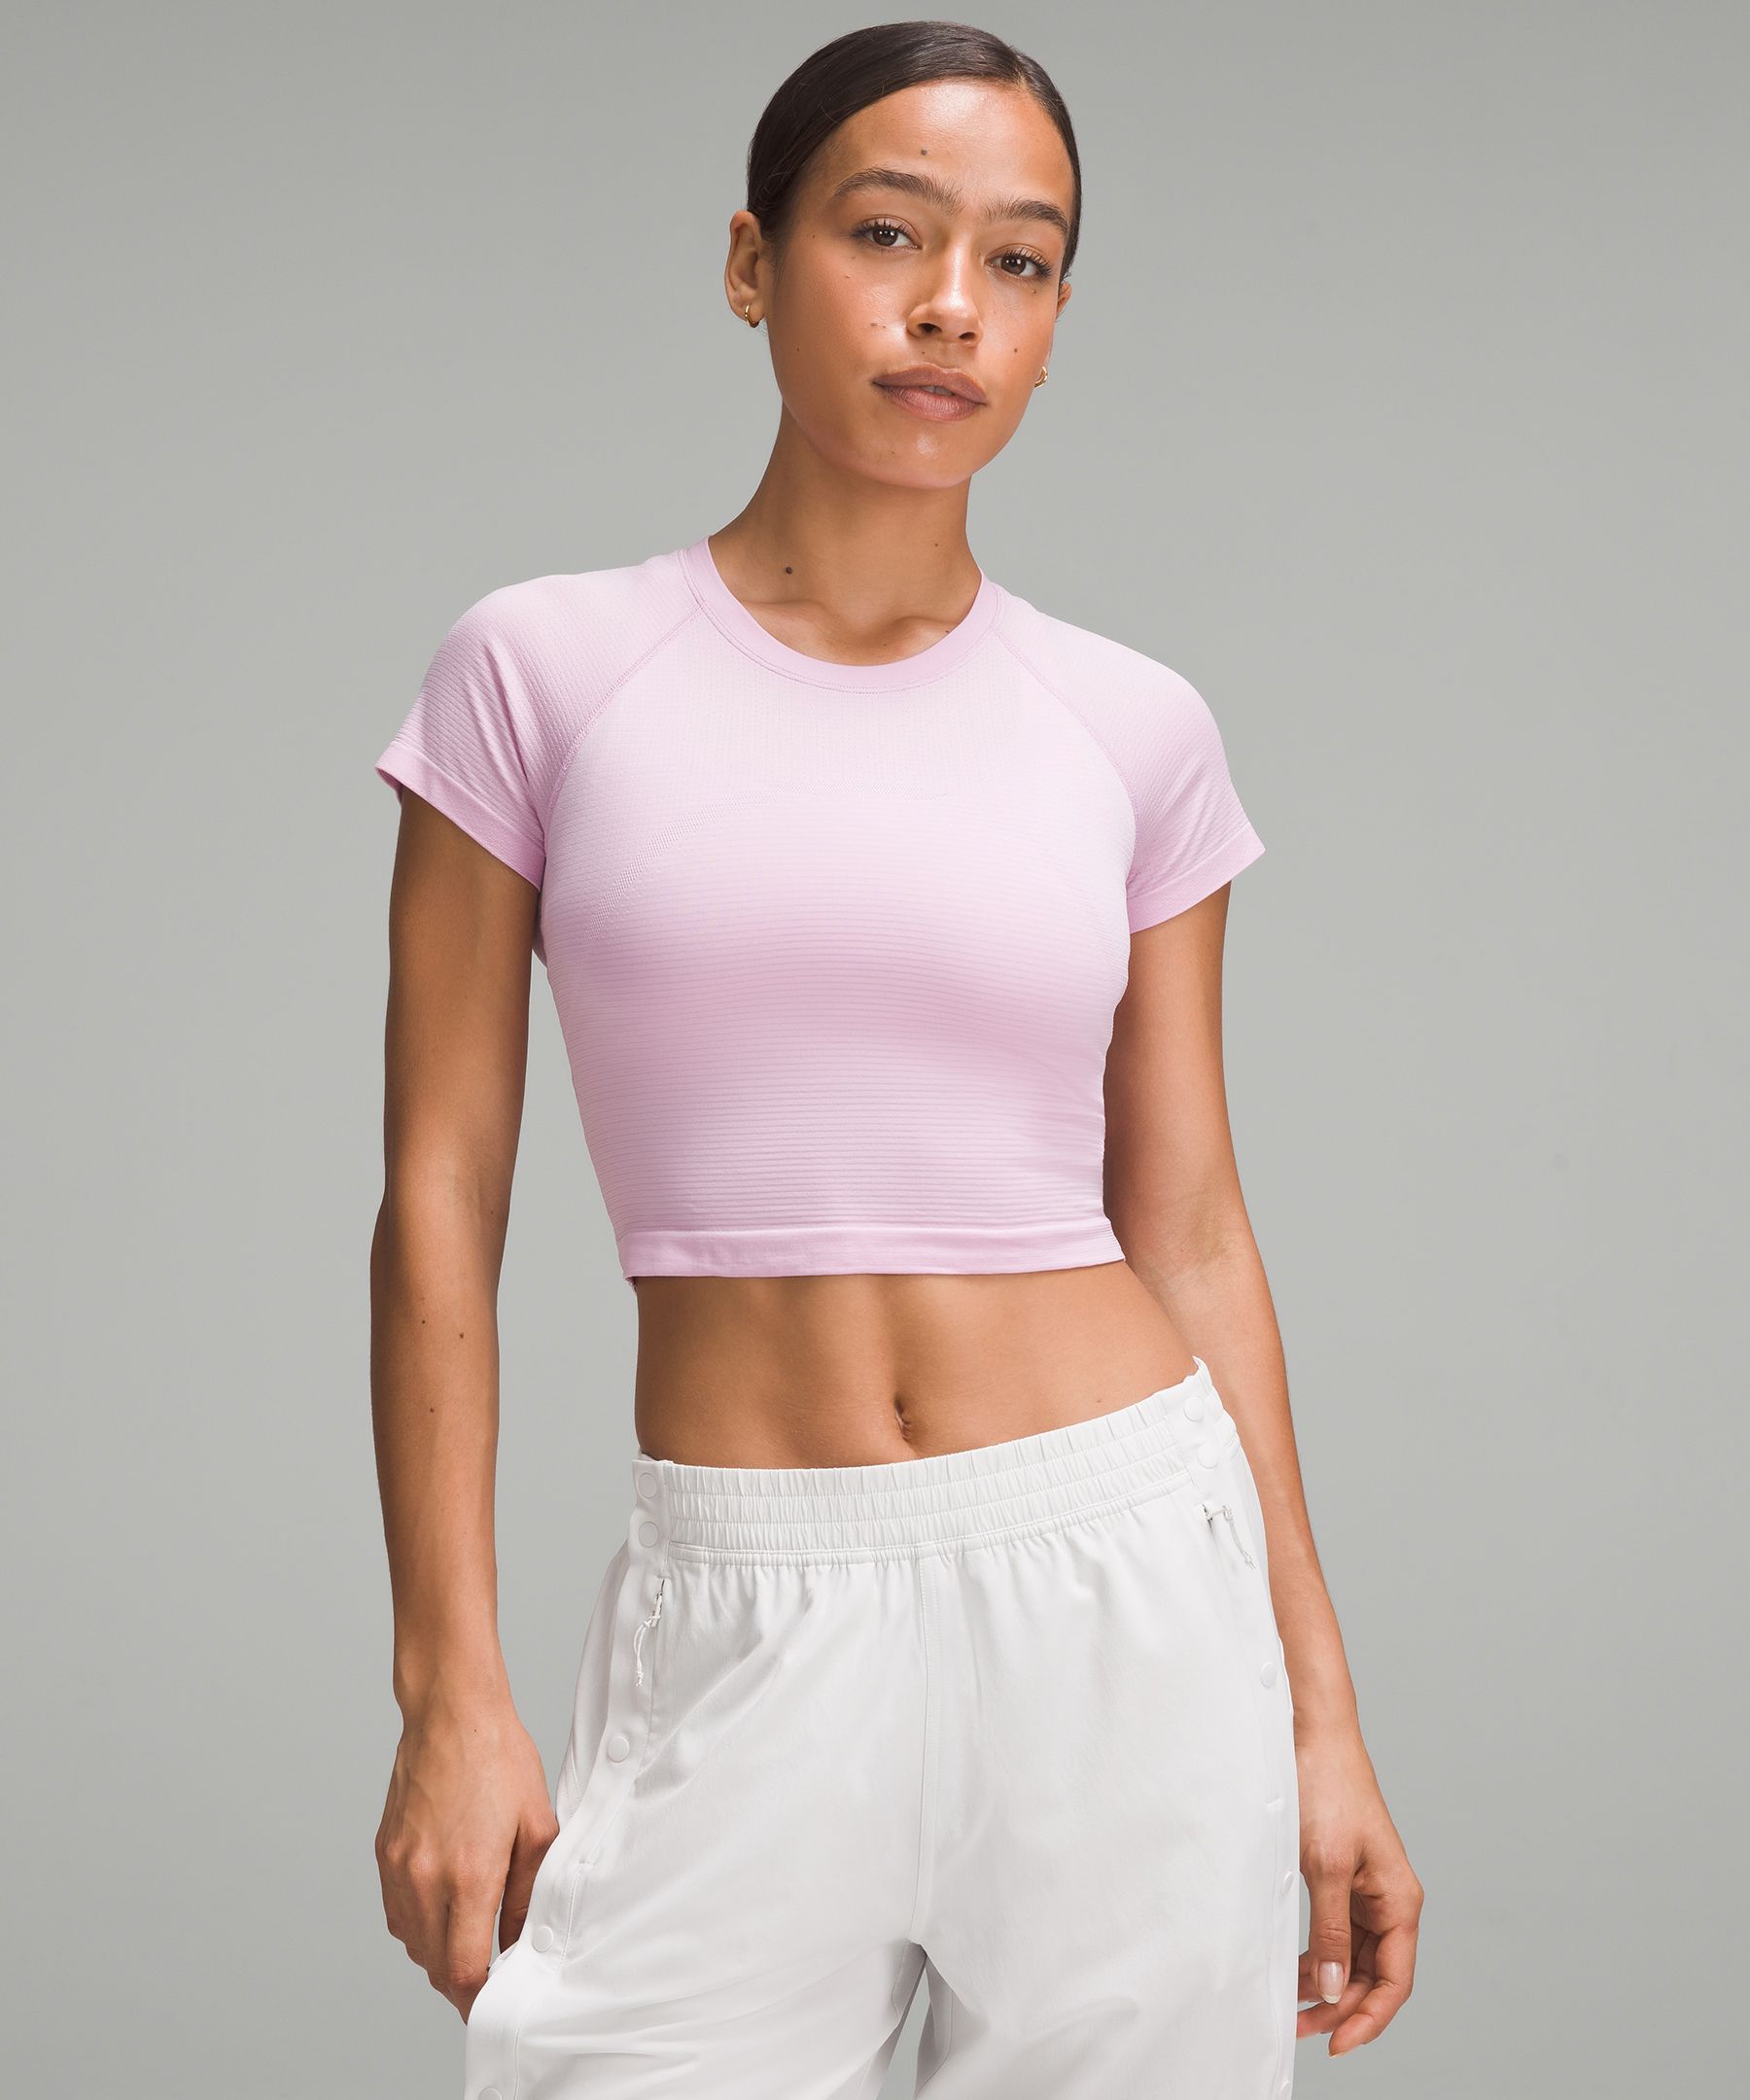 Lululemon Swiftly Tech Cropped Short-sleeve Shirt 2.0 In Pink